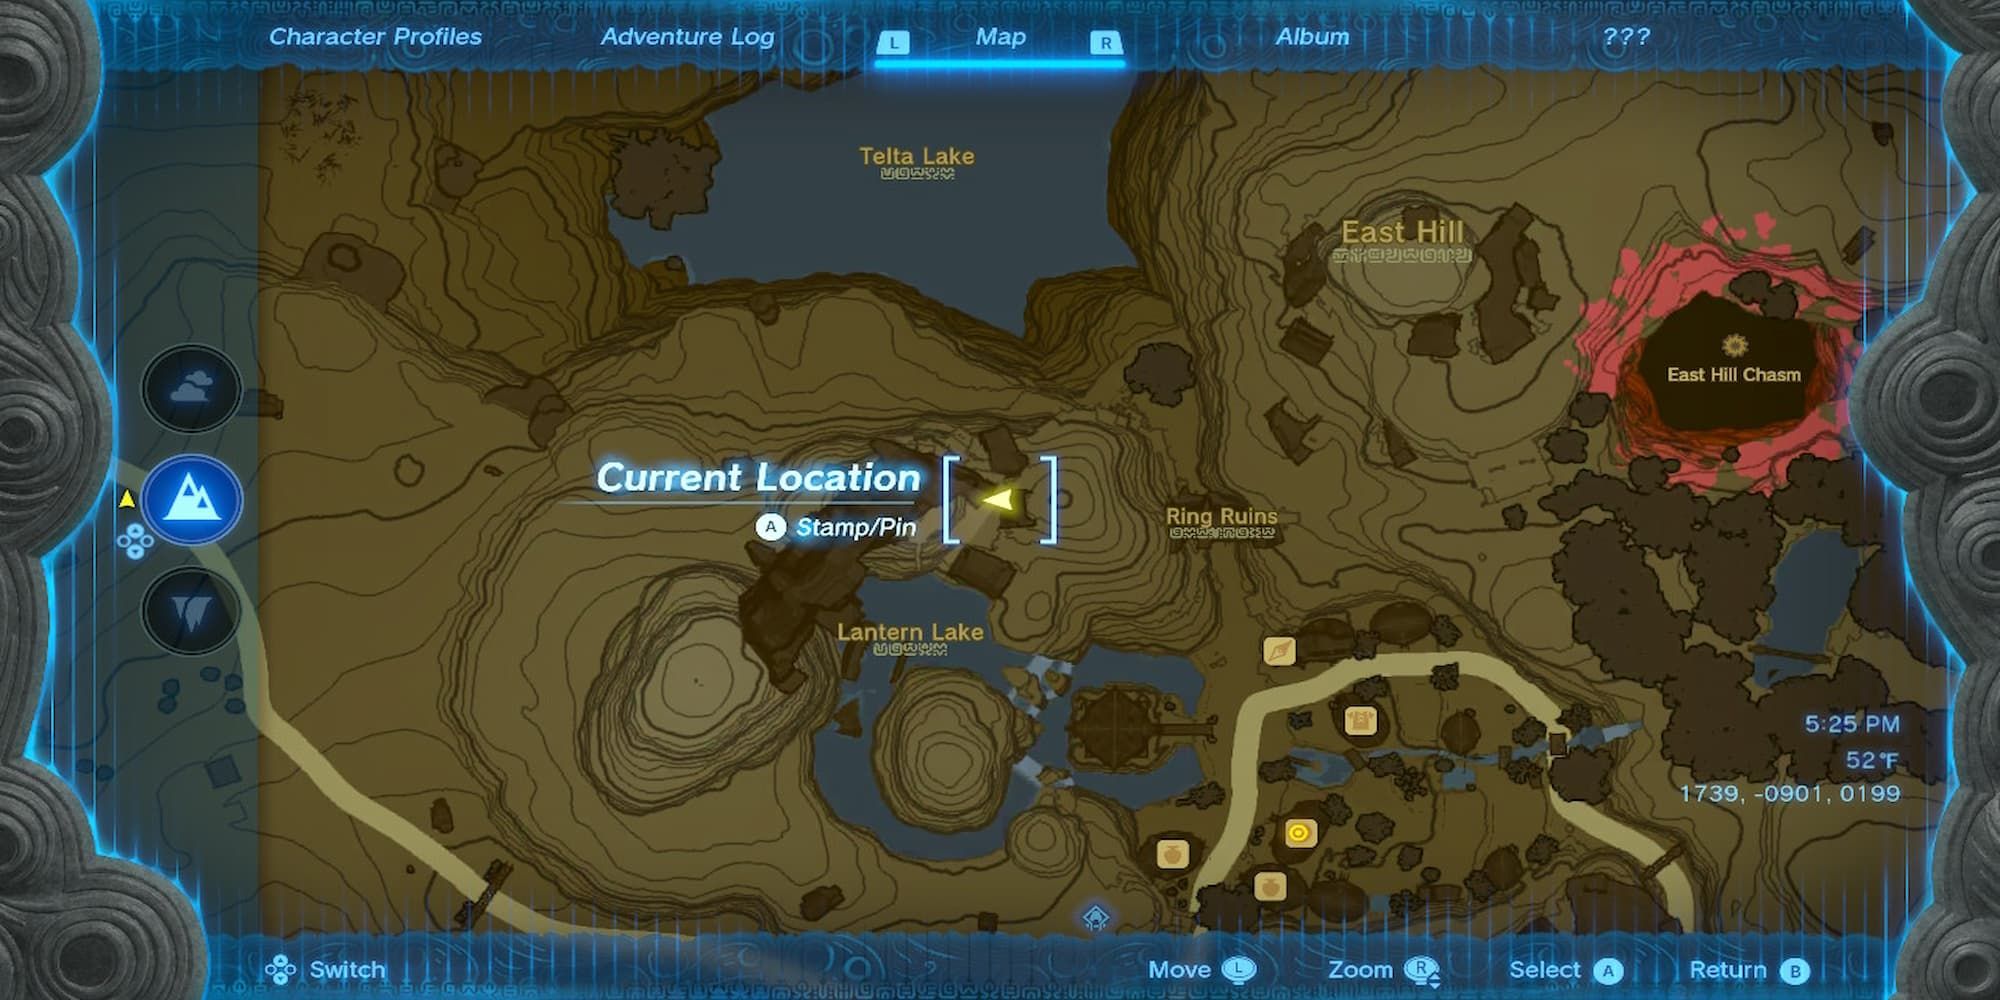 Innkeeper's location on the map 